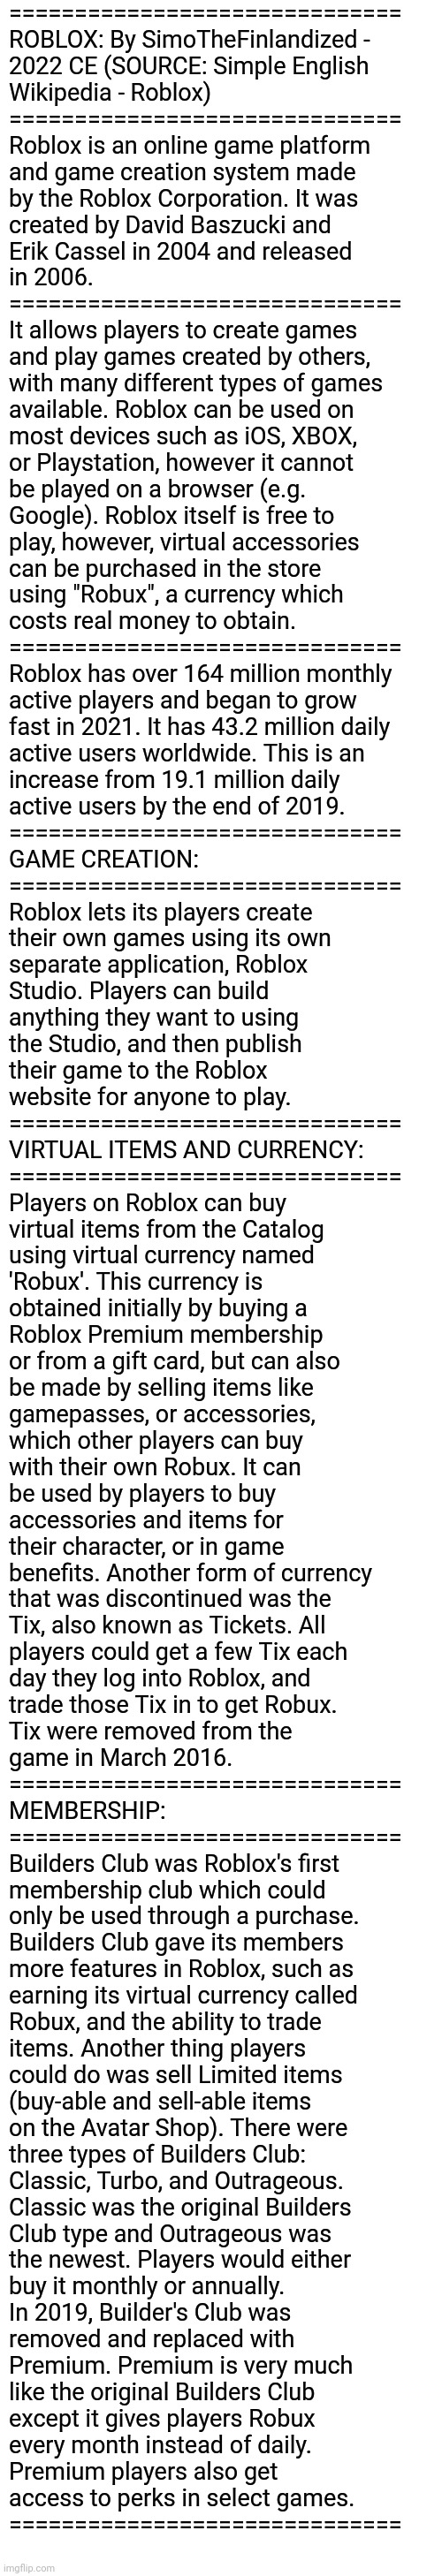 ROBLOX: By SimoTheFinlandized - 2022 CE (SOURCE: Simple English Wikipedia - Roblox) | ==============================
ROBLOX: By SimoTheFinlandized -
2022 CE (SOURCE: Simple English 
Wikipedia - Roblox)
==============================
Roblox is an online game platform 
and game creation system made 
by the Roblox Corporation. It was 
created by David Baszucki and 
Erik Cassel in 2004 and released 
in 2006.
==============================
It allows players to create games 
and play games created by others, 
with many different types of games 
available. Roblox can be used on 
most devices such as iOS, XBOX, 
or Playstation, however it cannot 
be played on a browser (e.g. 
Google). Roblox itself is free to 
play, however, virtual accessories 
can be purchased in the store 
using "Robux", a currency which 
costs real money to obtain.
==============================
Roblox has over 164 million monthly 
active players and began to grow 
fast in 2021. It has 43.2 million daily 
active users worldwide. This is an 
increase from 19.1 million daily 
active users by the end of 2019.
==============================
GAME CREATION:
==============================
Roblox lets its players create 
their own games using its own 
separate application, Roblox 
Studio. Players can build 
anything they want to using 
the Studio, and then publish 
their game to the Roblox 
website for anyone to play.
==============================
VIRTUAL ITEMS AND CURRENCY:
==============================
Players on Roblox can buy 
virtual items from the Catalog 
using virtual currency named 
'Robux'. This currency is 
obtained initially by buying a 
Roblox Premium membership 
or from a gift card, but can also 
be made by selling items like 
gamepasses, or accessories, 
which other players can buy 
with their own Robux. It can 
be used by players to buy 
accessories and items for 
their character, or in game 
benefits. Another form of currency 
that was discontinued was the 
Tix, also known as Tickets. All 
players could get a few Tix each 
day they log into Roblox, and 
trade those Tix in to get Robux. 
Tix were removed from the 
game in March 2016.
==============================
MEMBERSHIP:
==============================
Builders Club was Roblox's first 
membership club which could 
only be used through a purchase. 
Builders Club gave its members 
more features in Roblox, such as 
earning its virtual currency called 
Robux, and the ability to trade 
items. Another thing players 
could do was sell Limited items 
(buy-able and sell-able items 
on the Avatar Shop). There were 
three types of Builders Club: 
Classic, Turbo, and Outrageous. 
Classic was the original Builders 
Club type and Outrageous was 
the newest. Players would either 
buy it monthly or annually.
In 2019, Builder's Club was 
removed and replaced with 
Premium. Premium is very much 
like the original Builders Club 
except it gives players Robux 
every month instead of daily. 
Premium players also get 
access to perks in select games.
============================== | image tagged in simothefinlandized,video games,online gaming,roblox,summary,essay | made w/ Imgflip meme maker